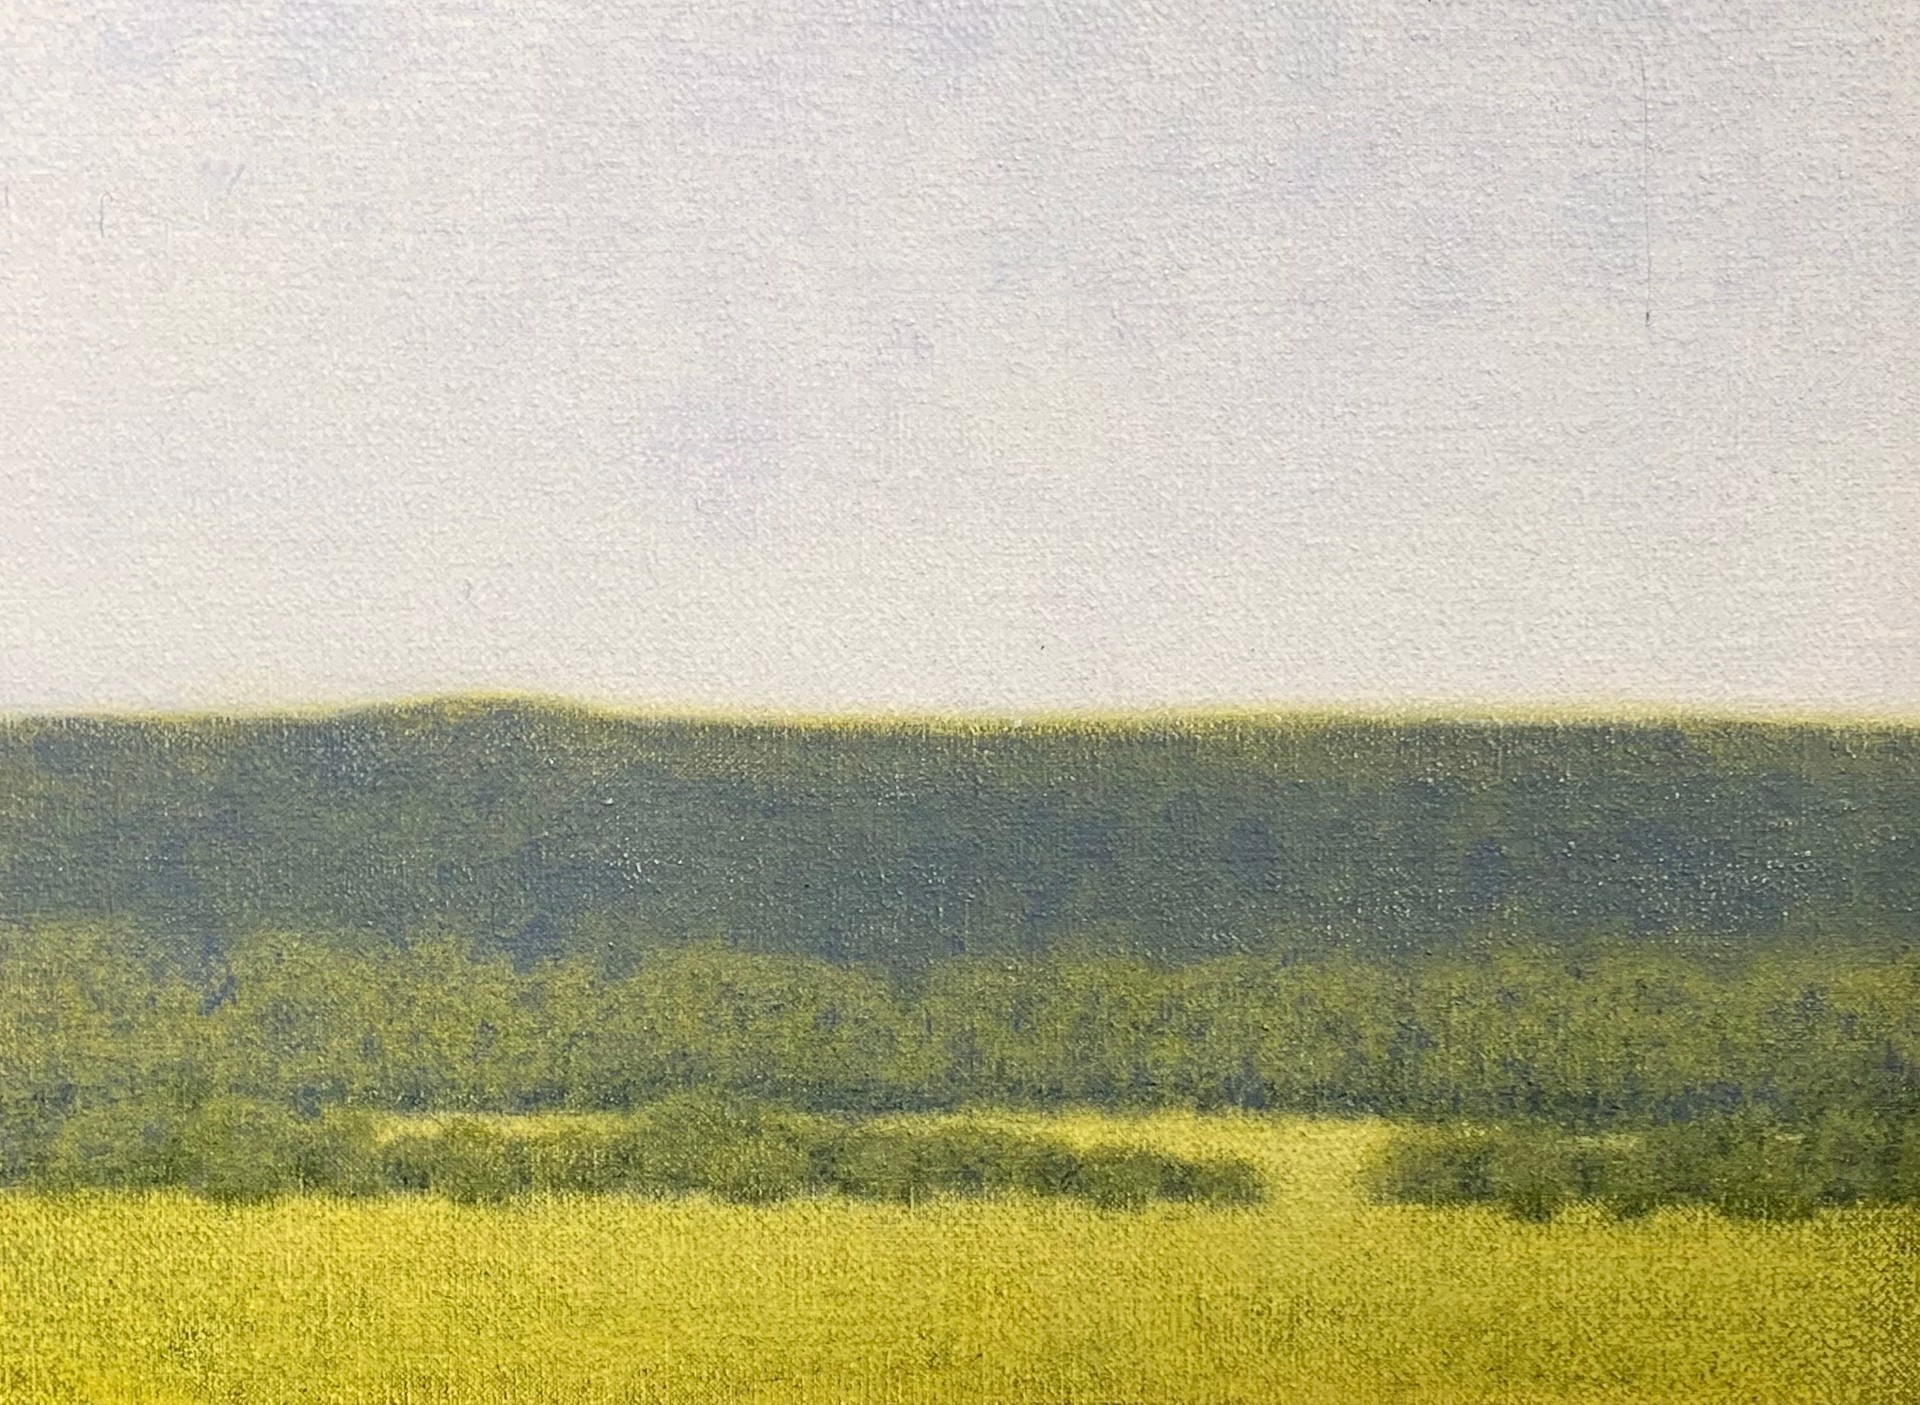 GREEN PASTURES by William "Lucky" Davis